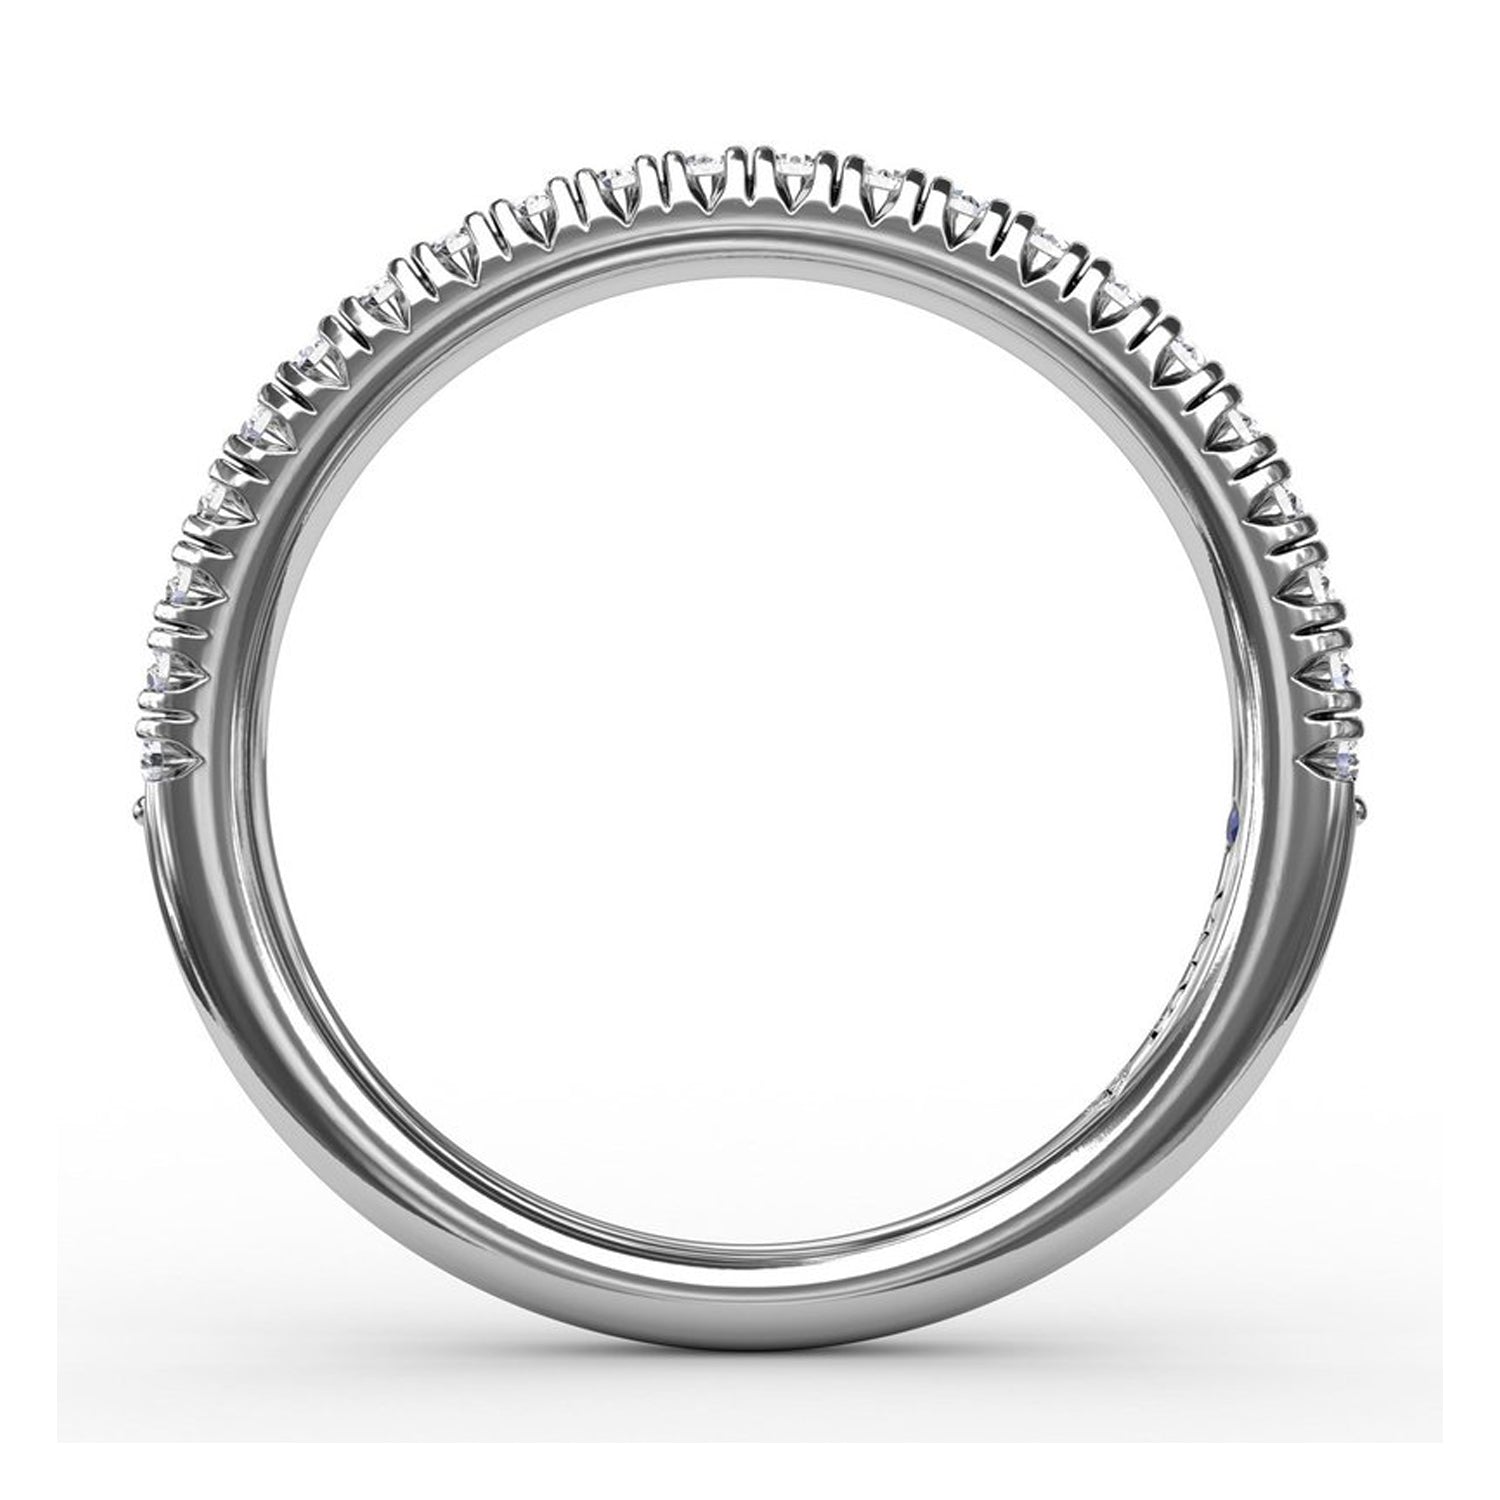 Fana Delicate Modern Pave Diamond Anniversary Band in 14kt White Gold (1/4ct tw)